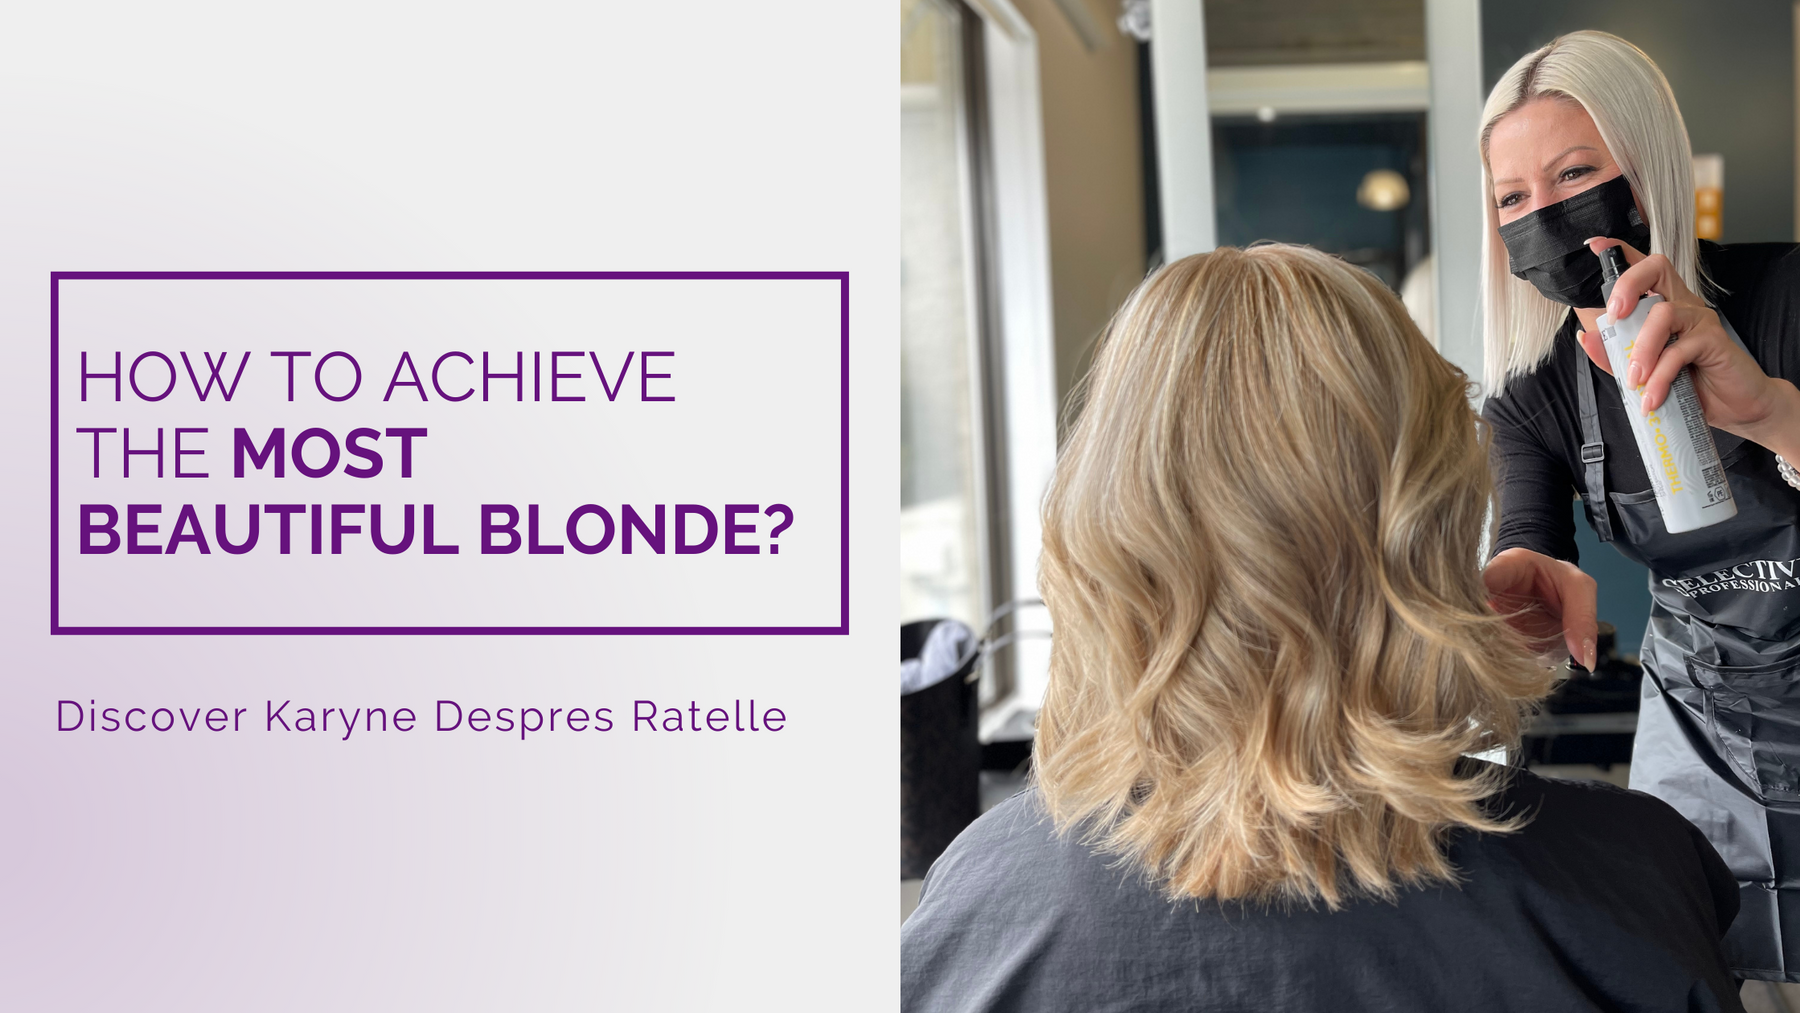 How to achieve the most beautiful blond?